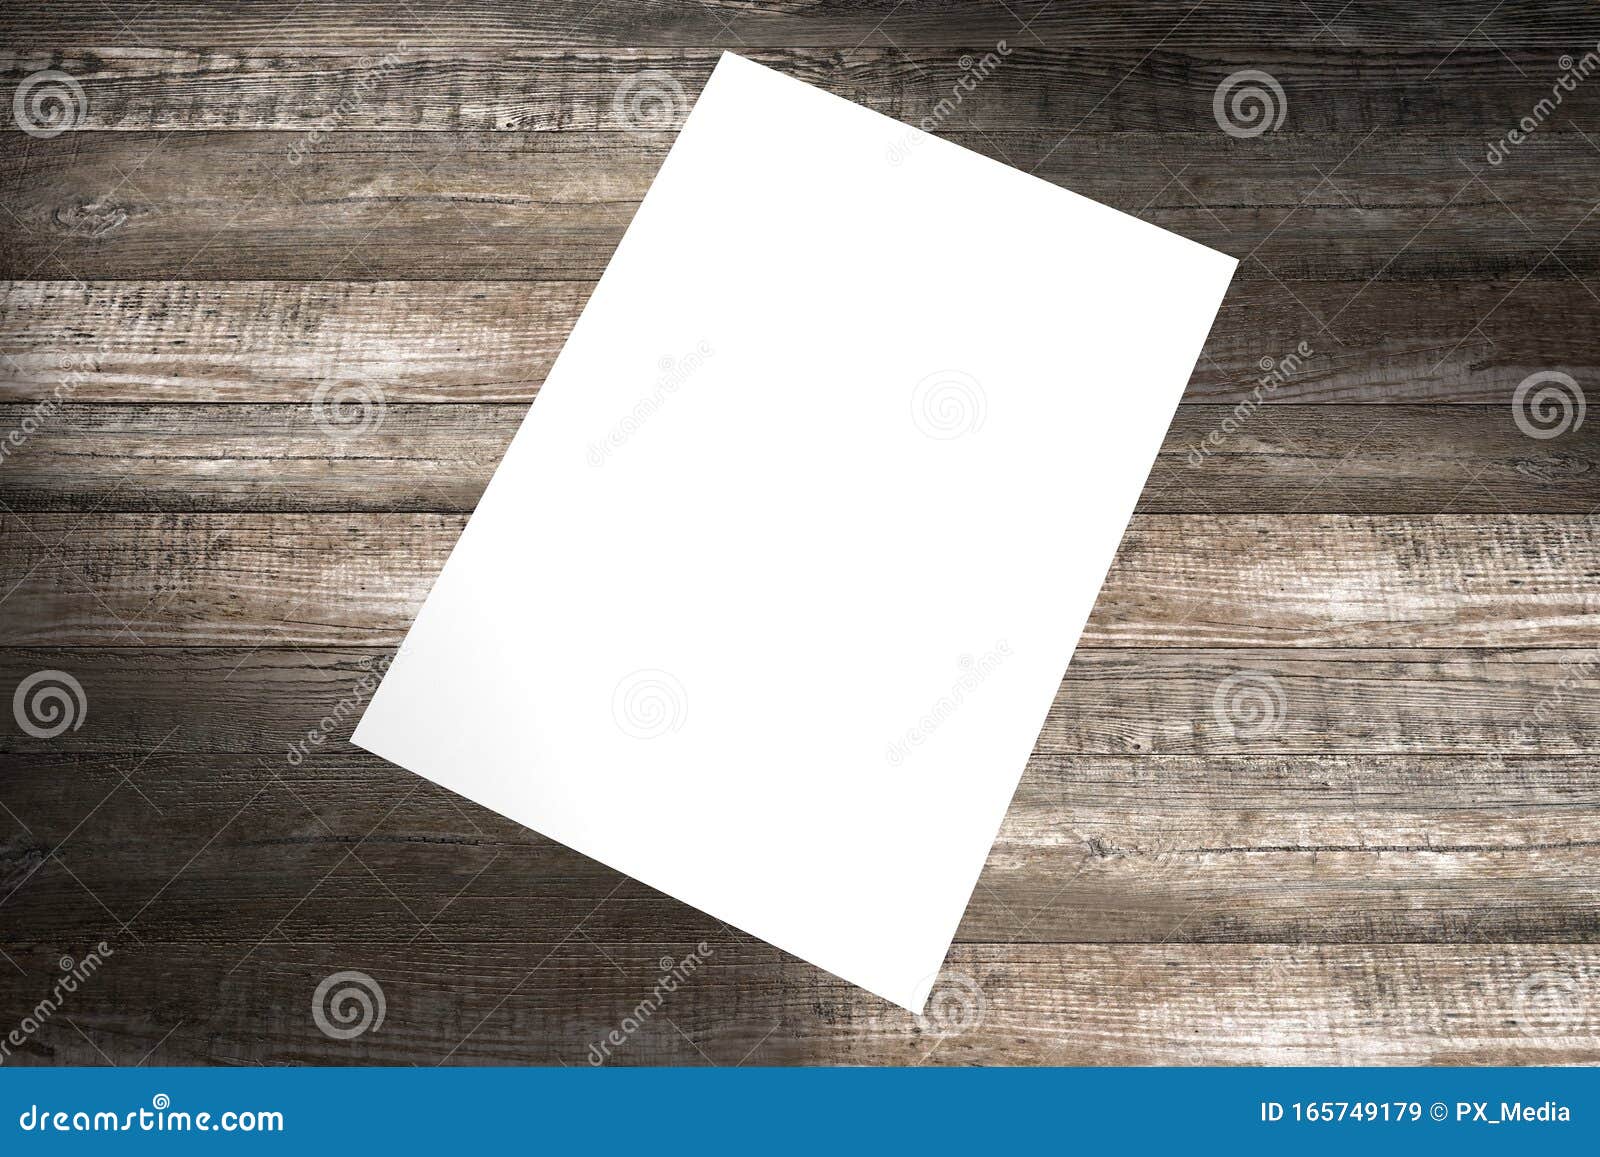 Headed Paper : Pin On Professional Letterhead Template : Click the style you prefer.